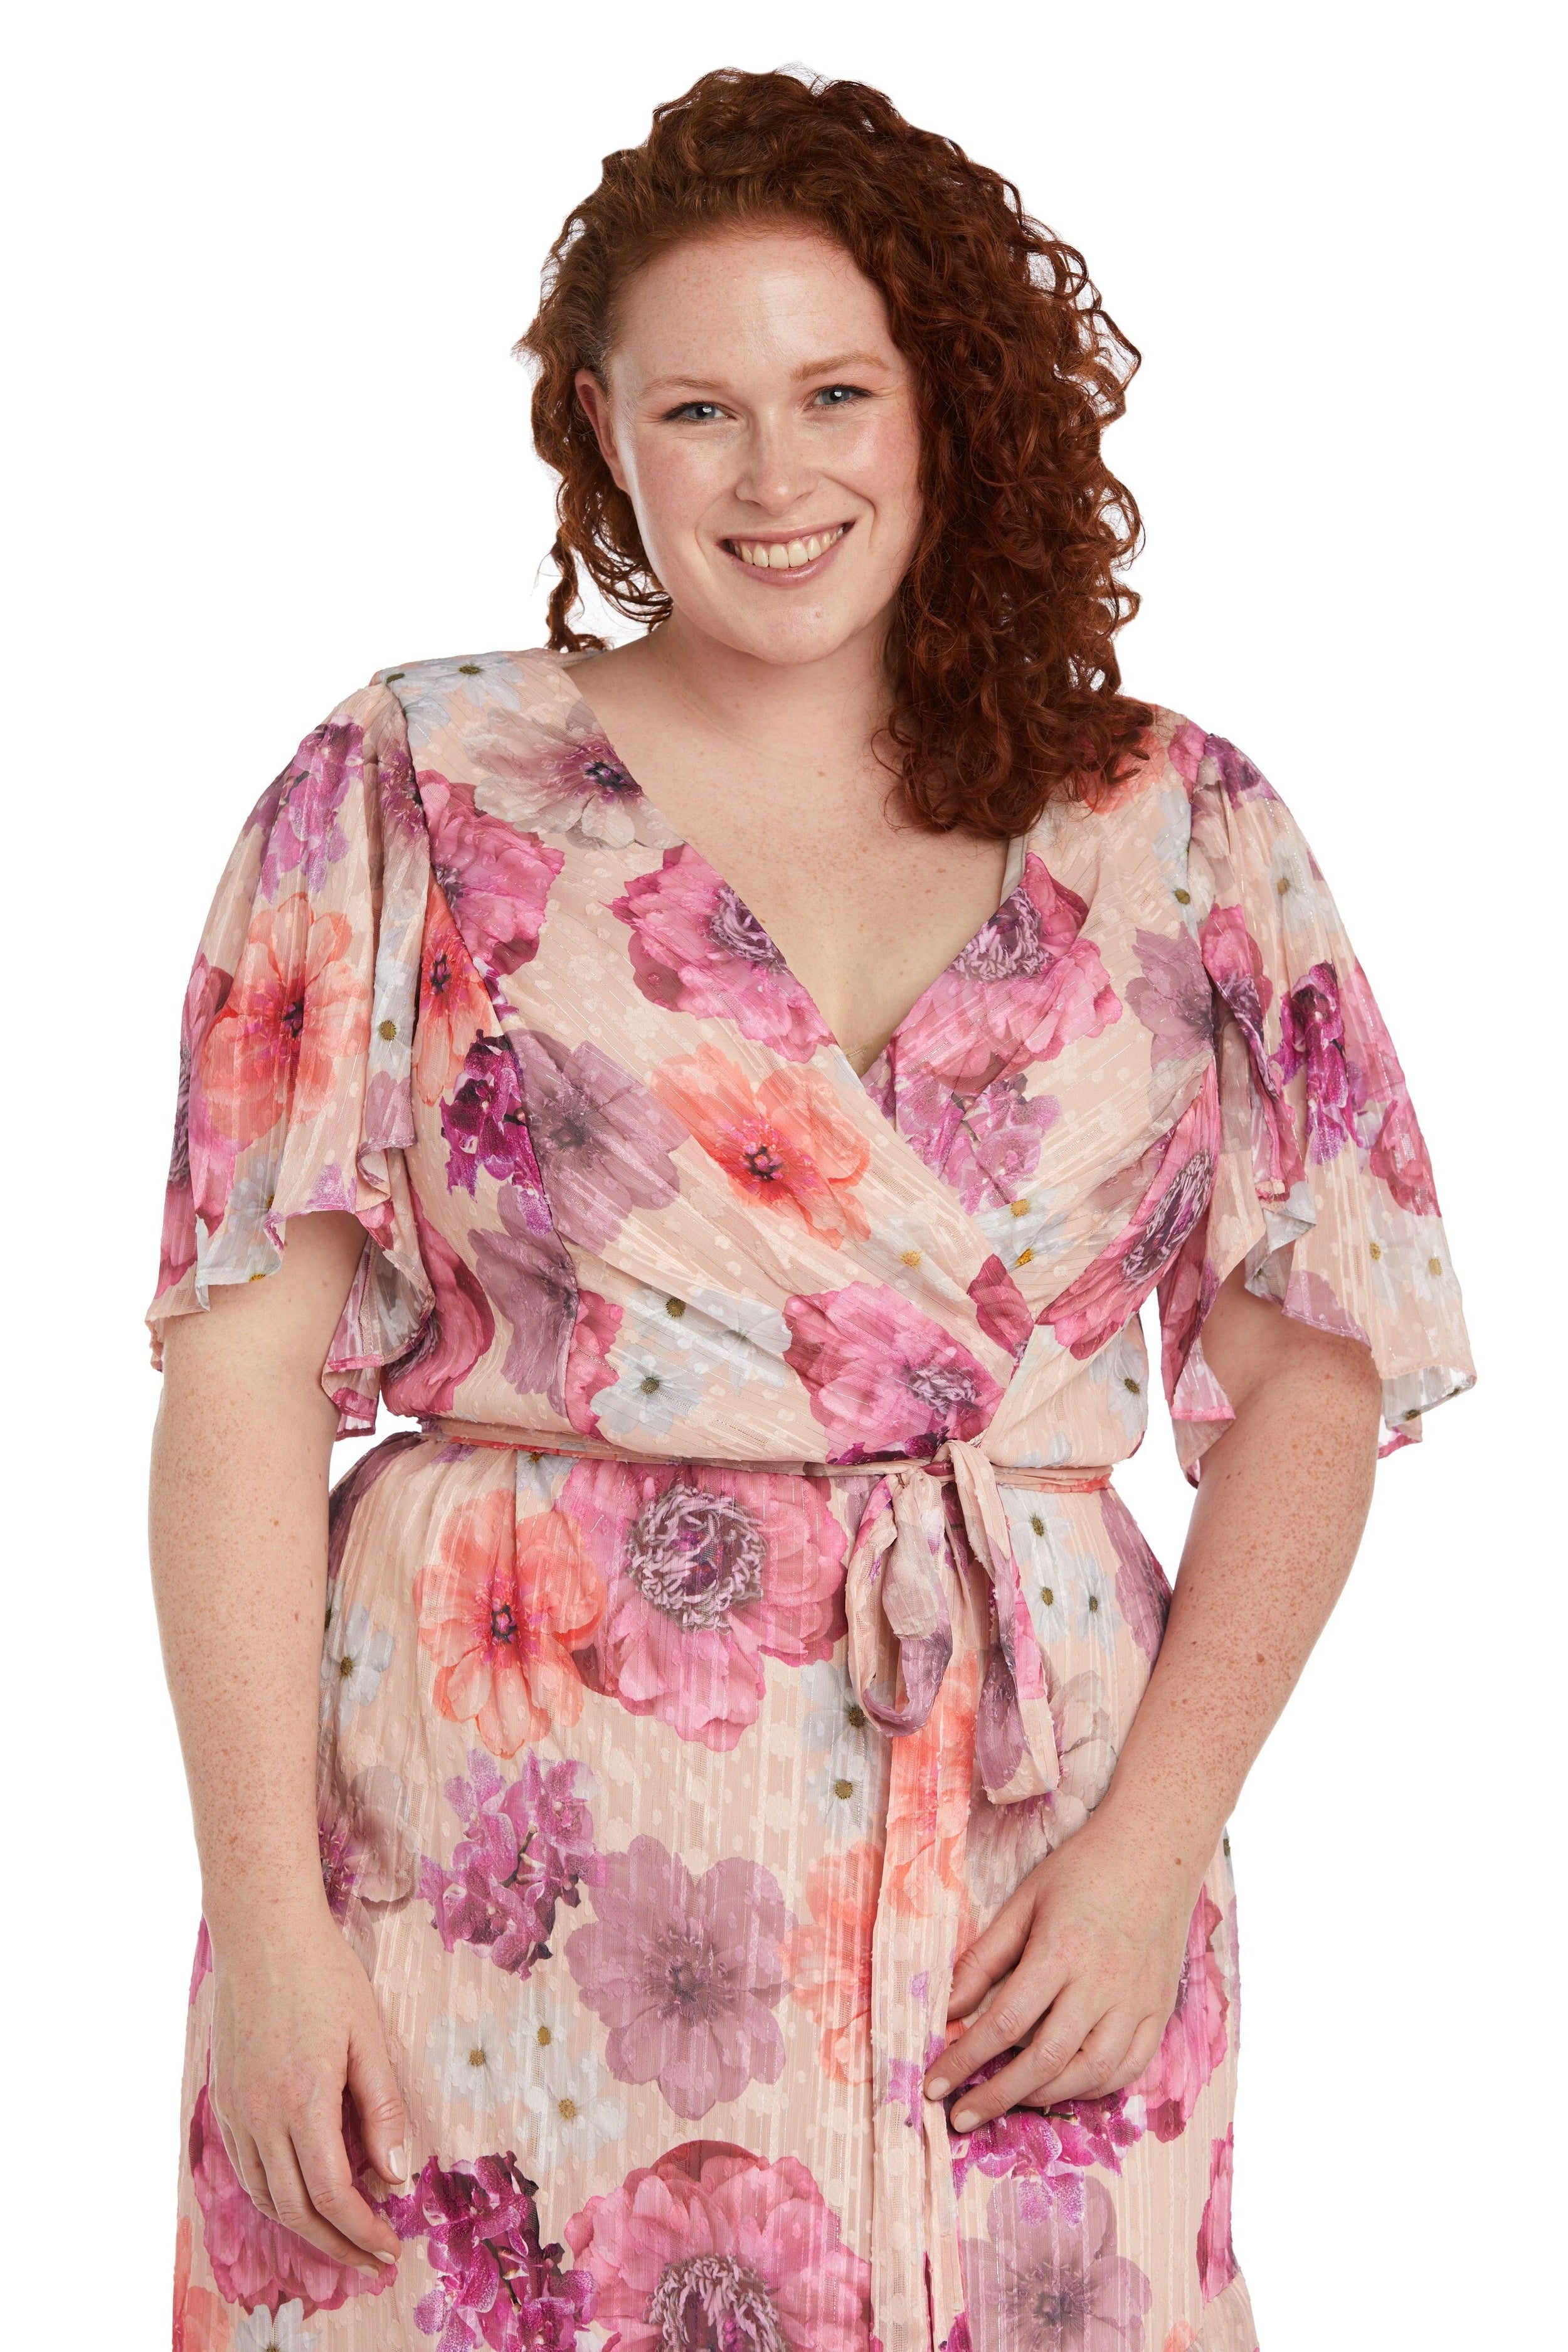 Nightway High Low Floral Plus Size Dress 22138W